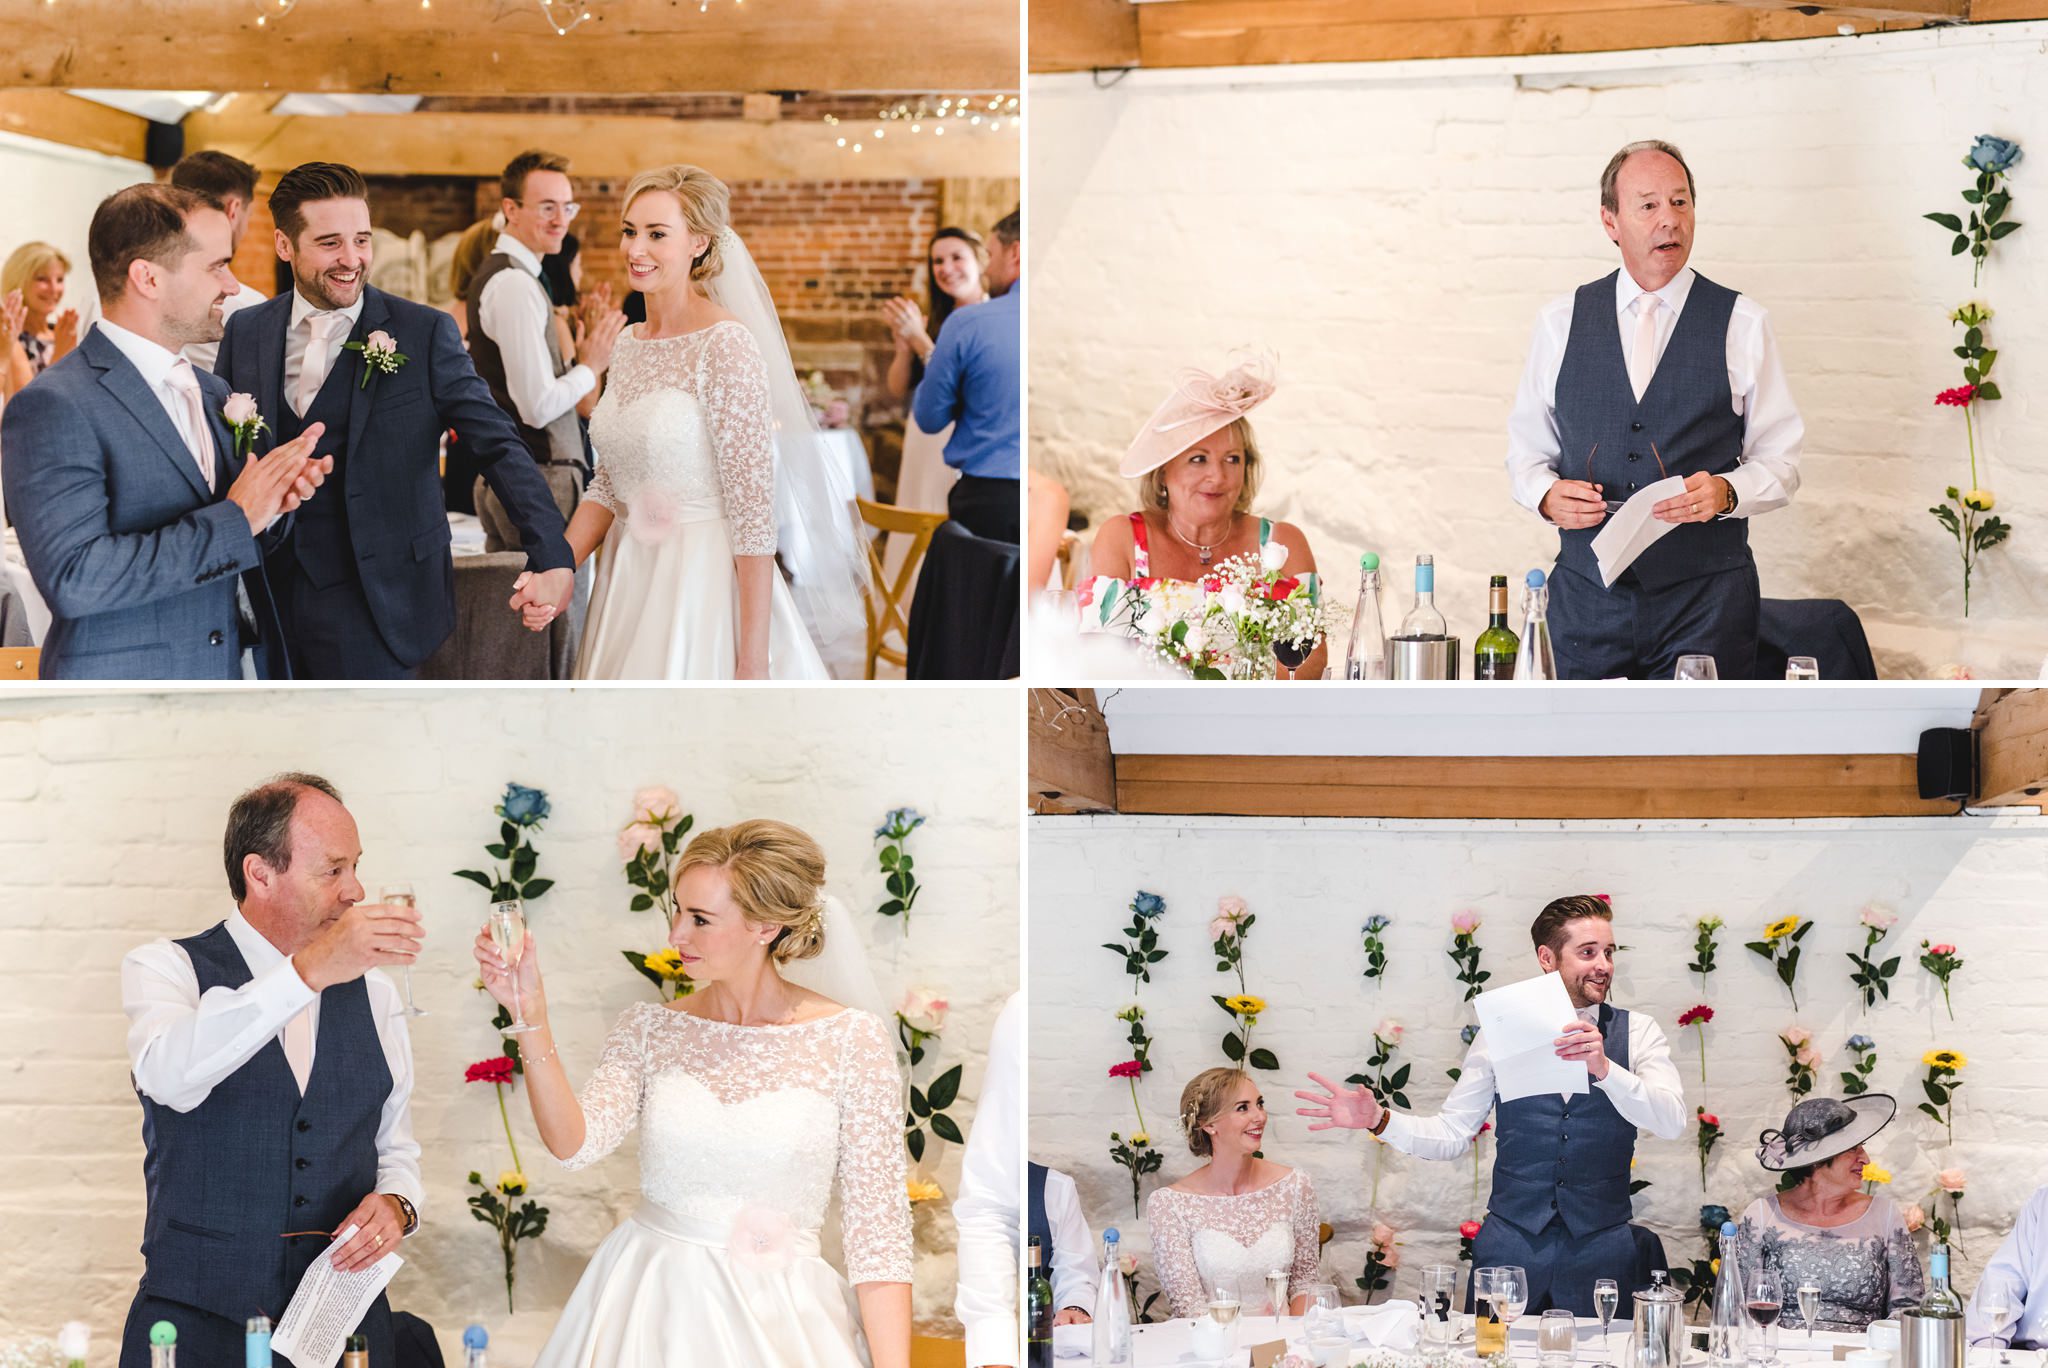 Speeches in Worcestershire at a wedding